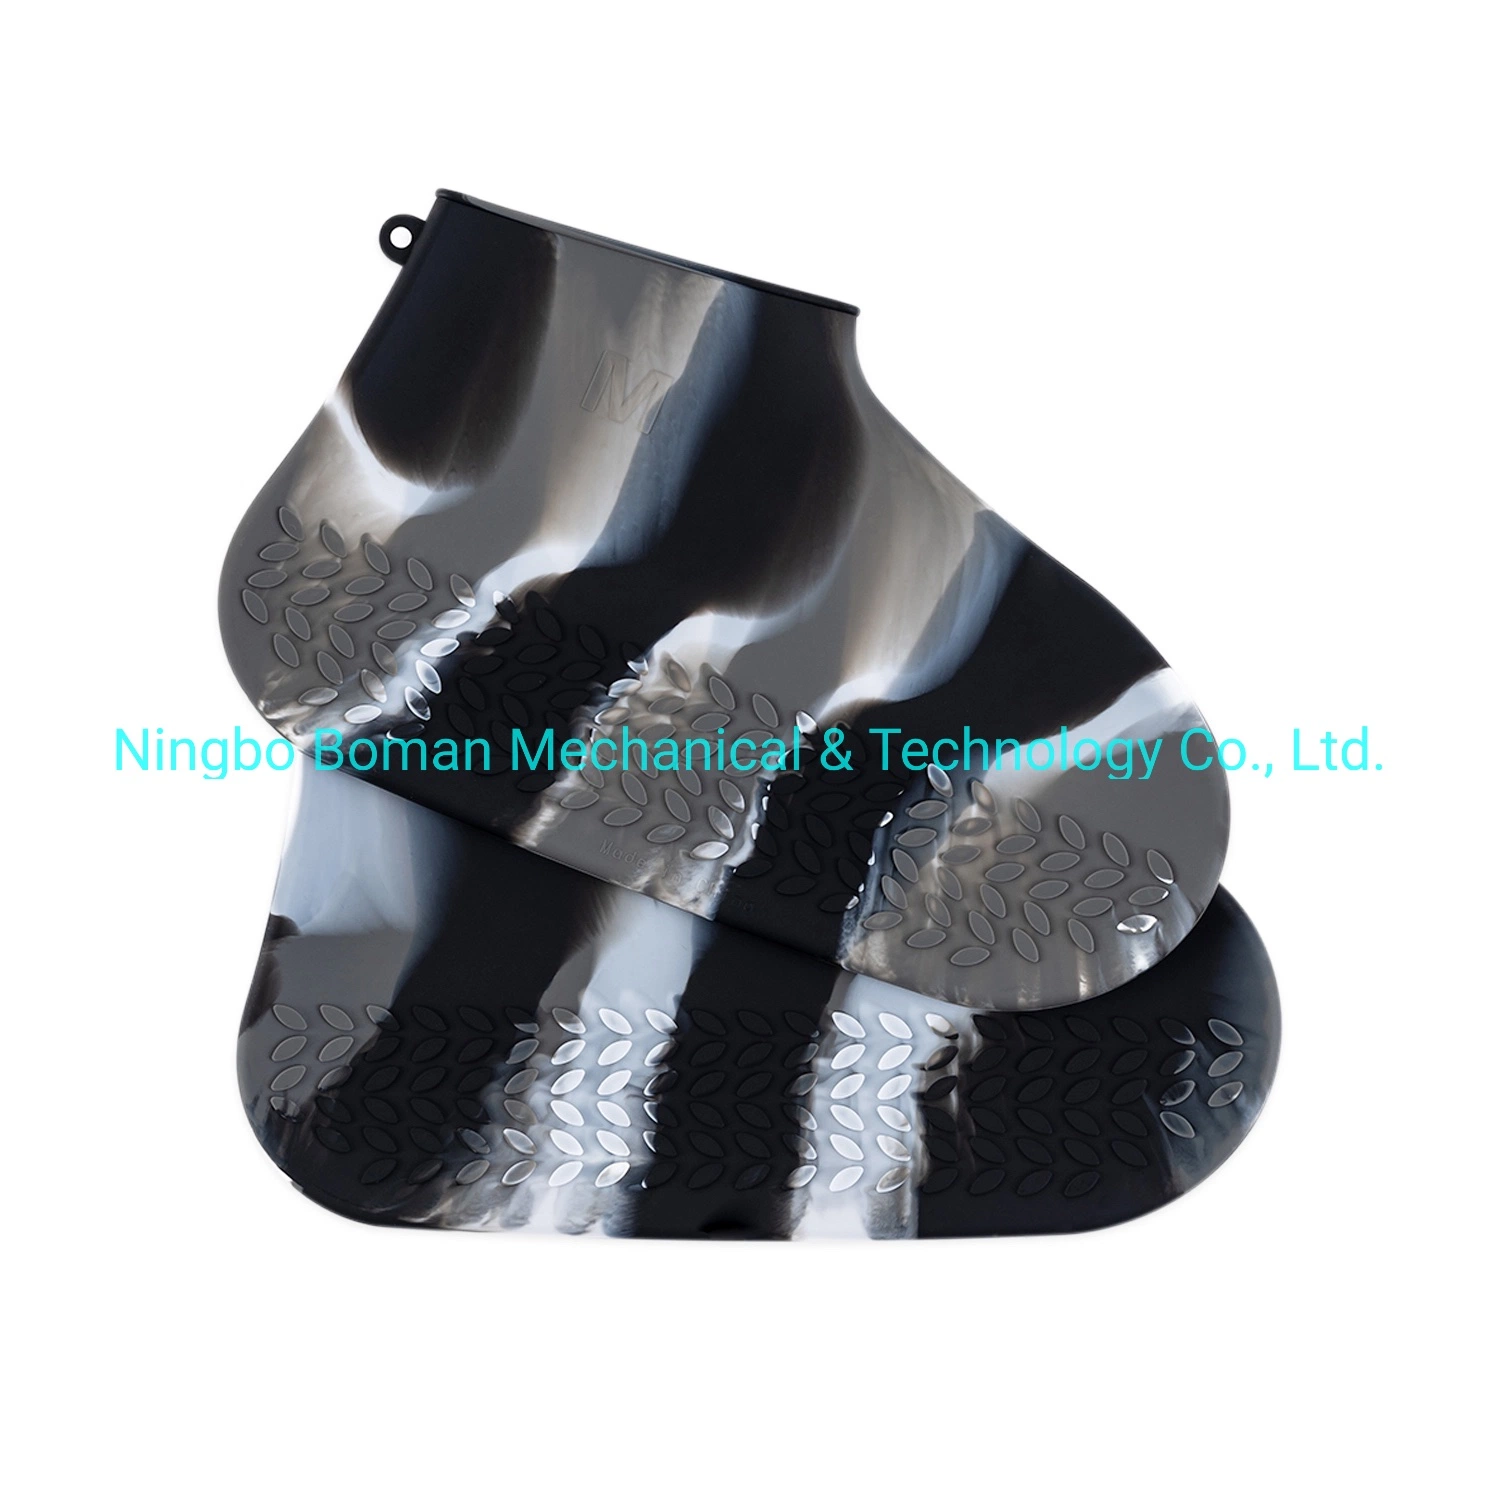 Silicone Rubber Product, Rubber Parts, Rubber Shoe Cover